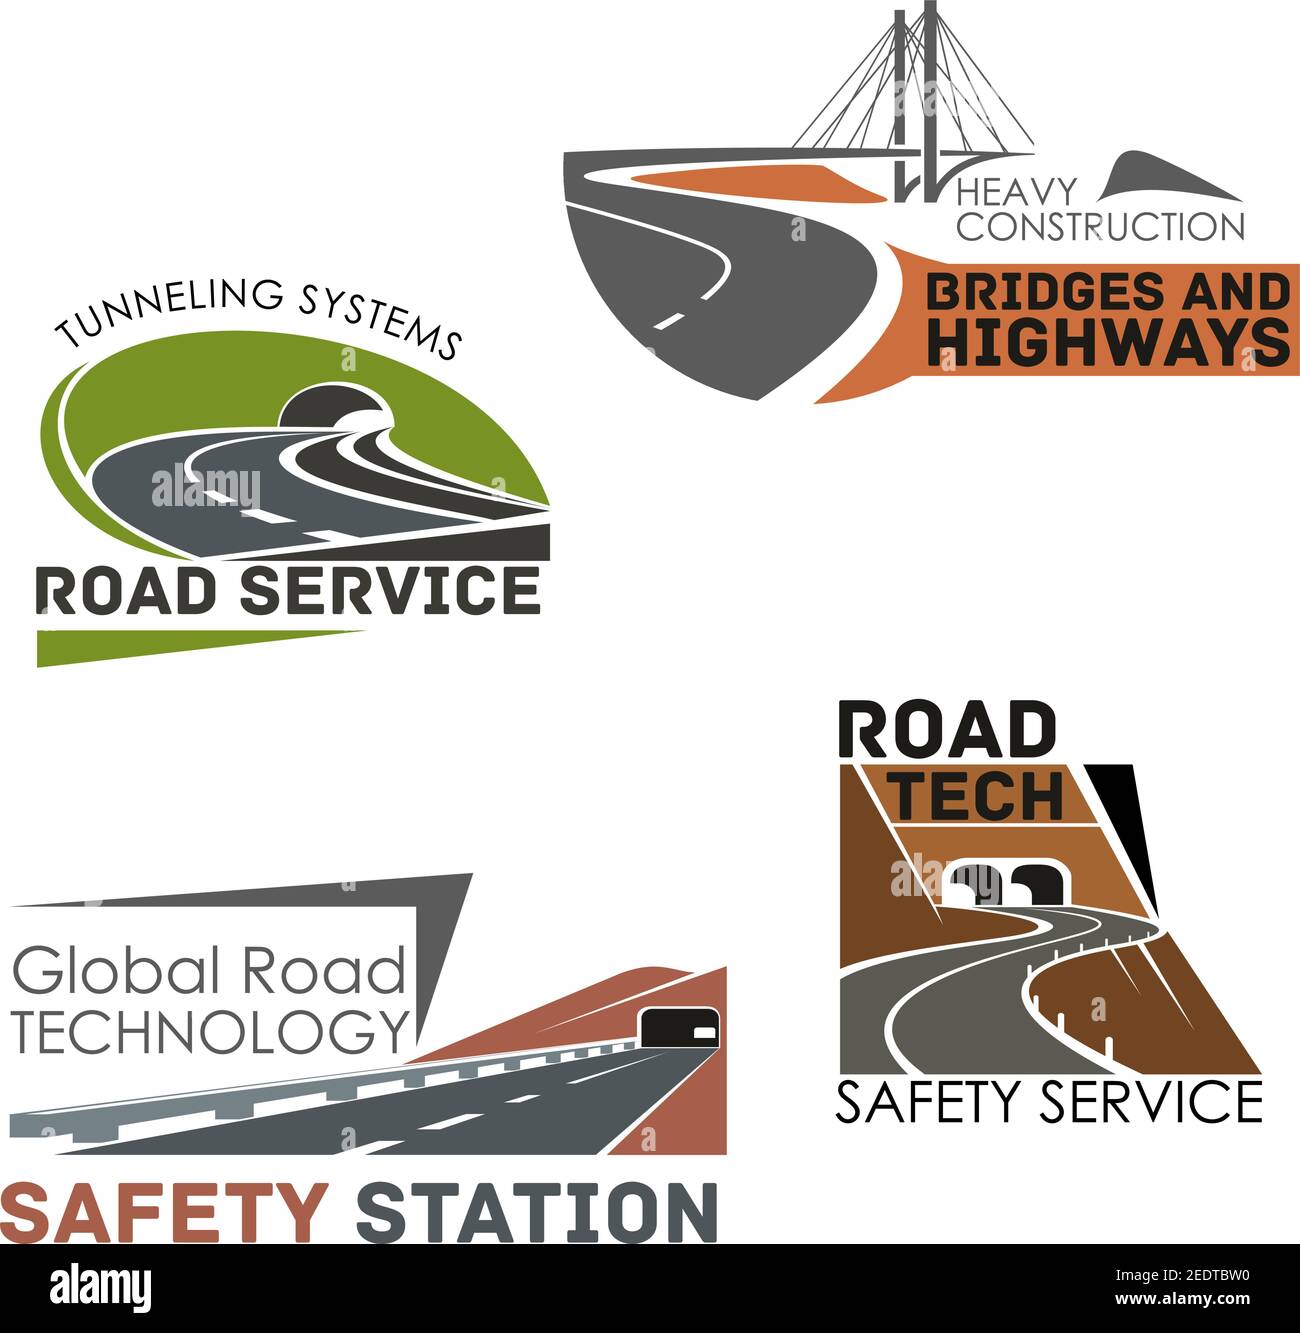 Highways and motorways vector icons of roads, tunnels and bridges building and construction or service company. Emblems set of expressway drives, tran Stock Vector